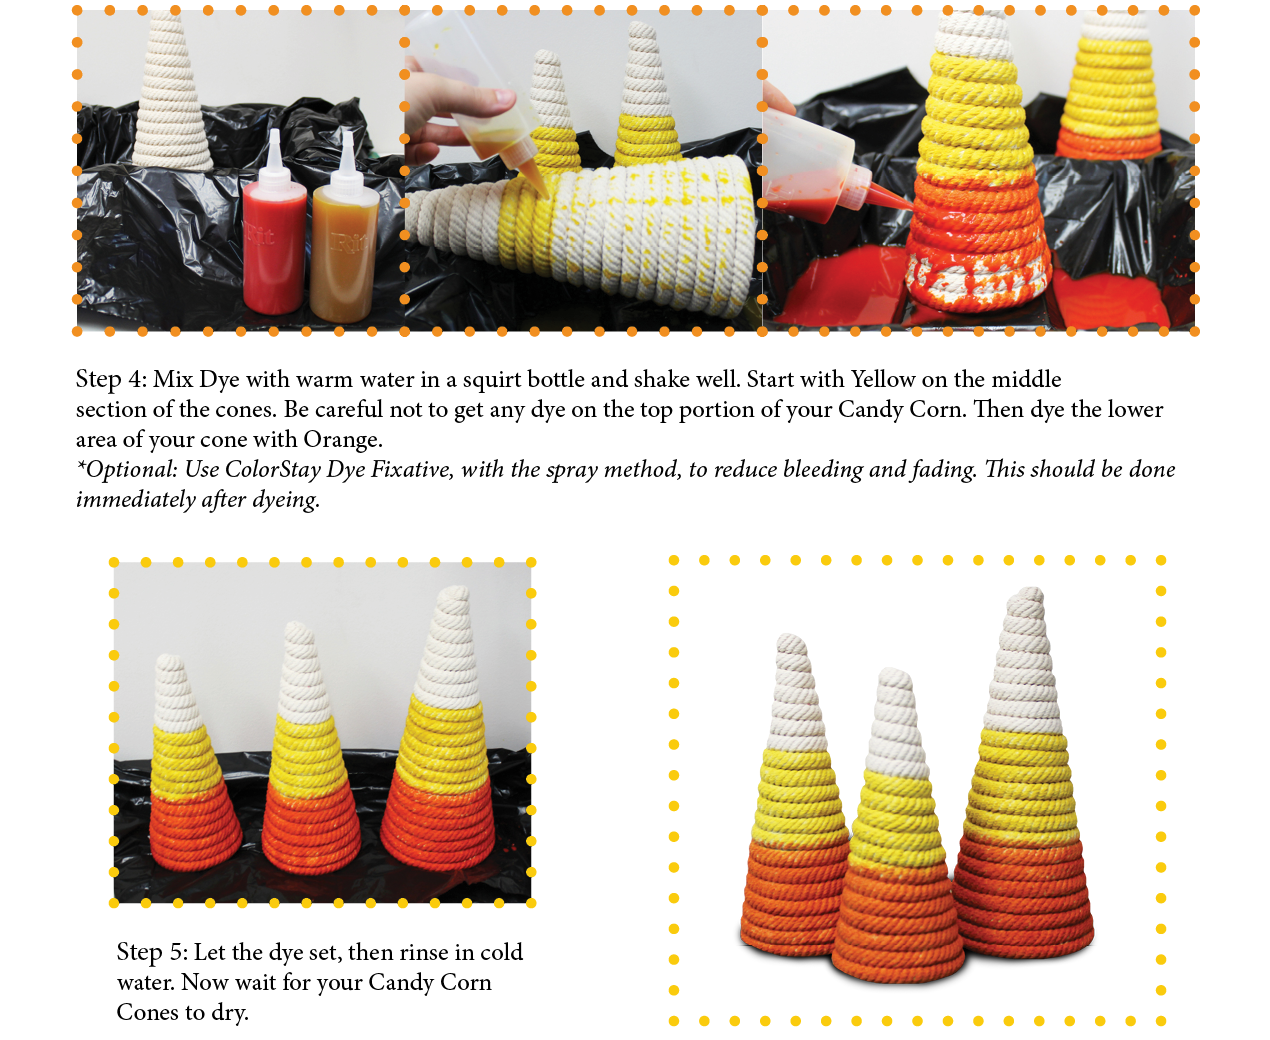 Second set of steps to creating your own Candy Corn Cones